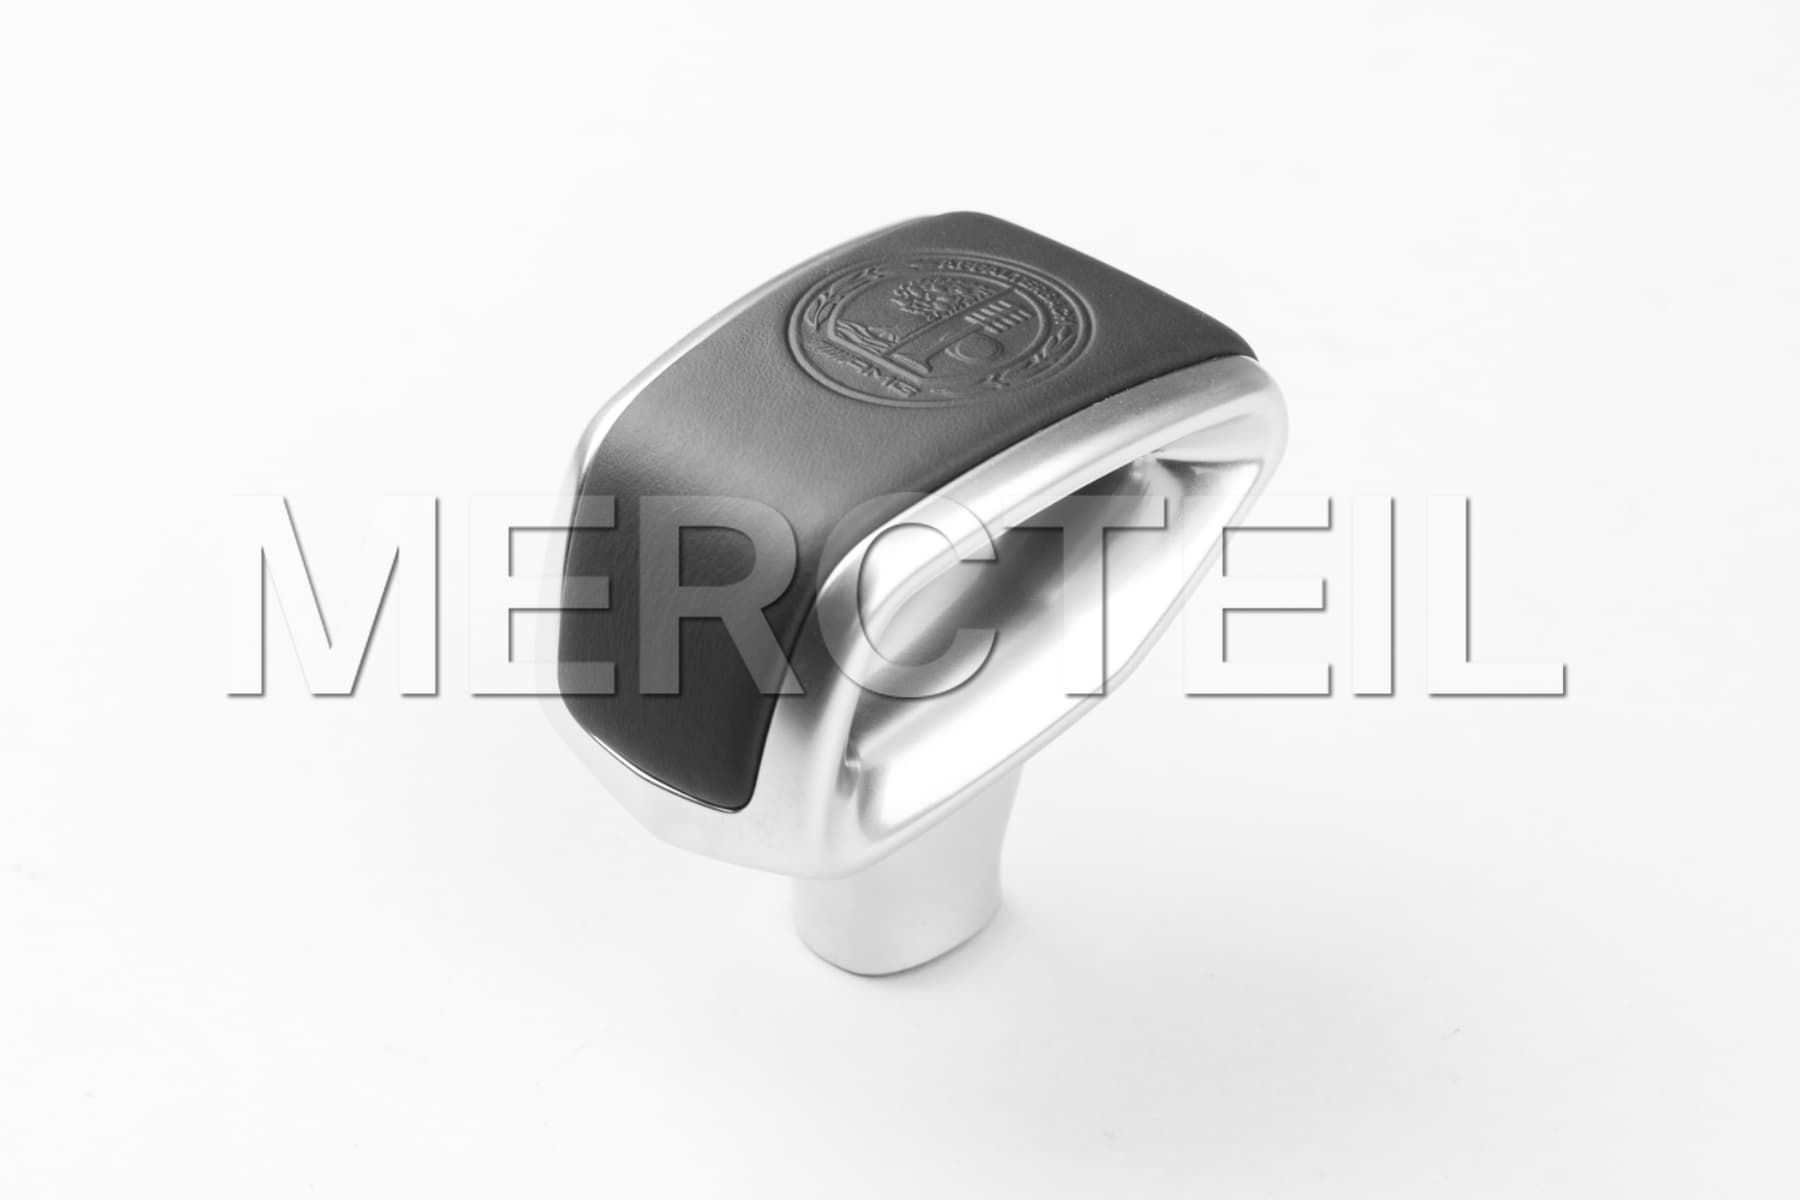 AMG Selector Lever Handle (part number: A21826000009E38)